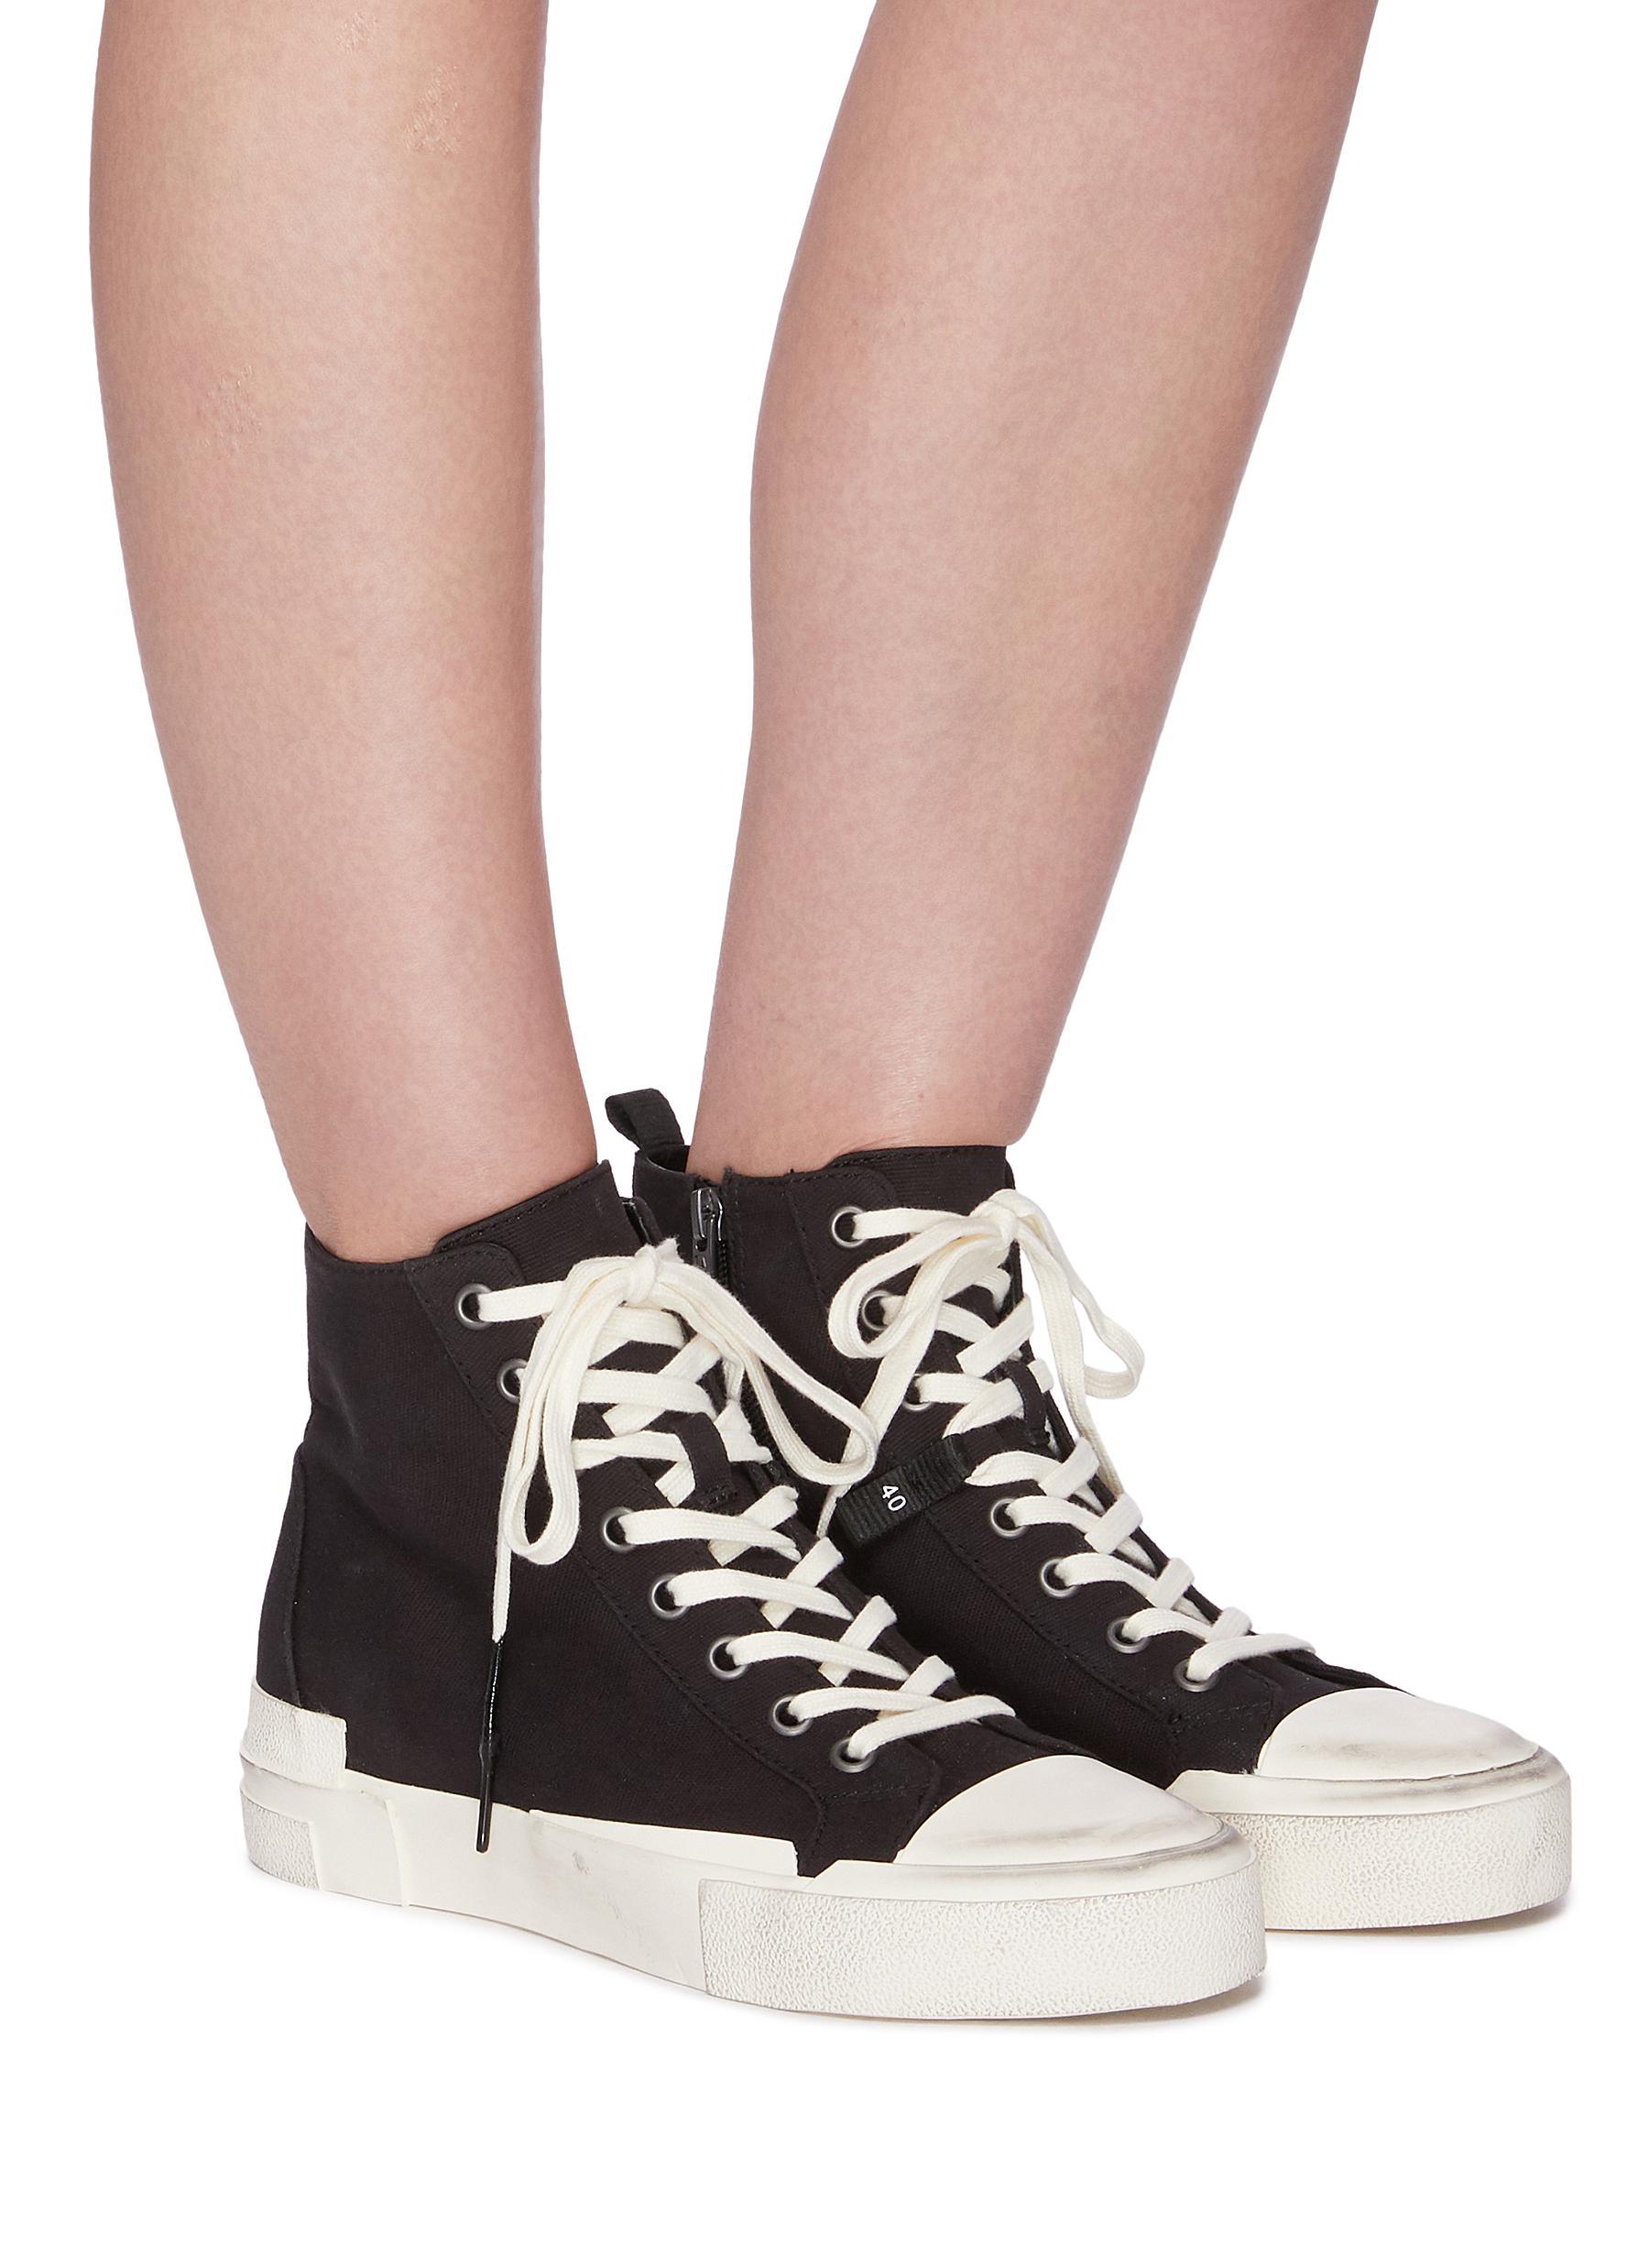 Ash Rubber Ghibly' High Top Lace Up Sneakers in Black - Lyst